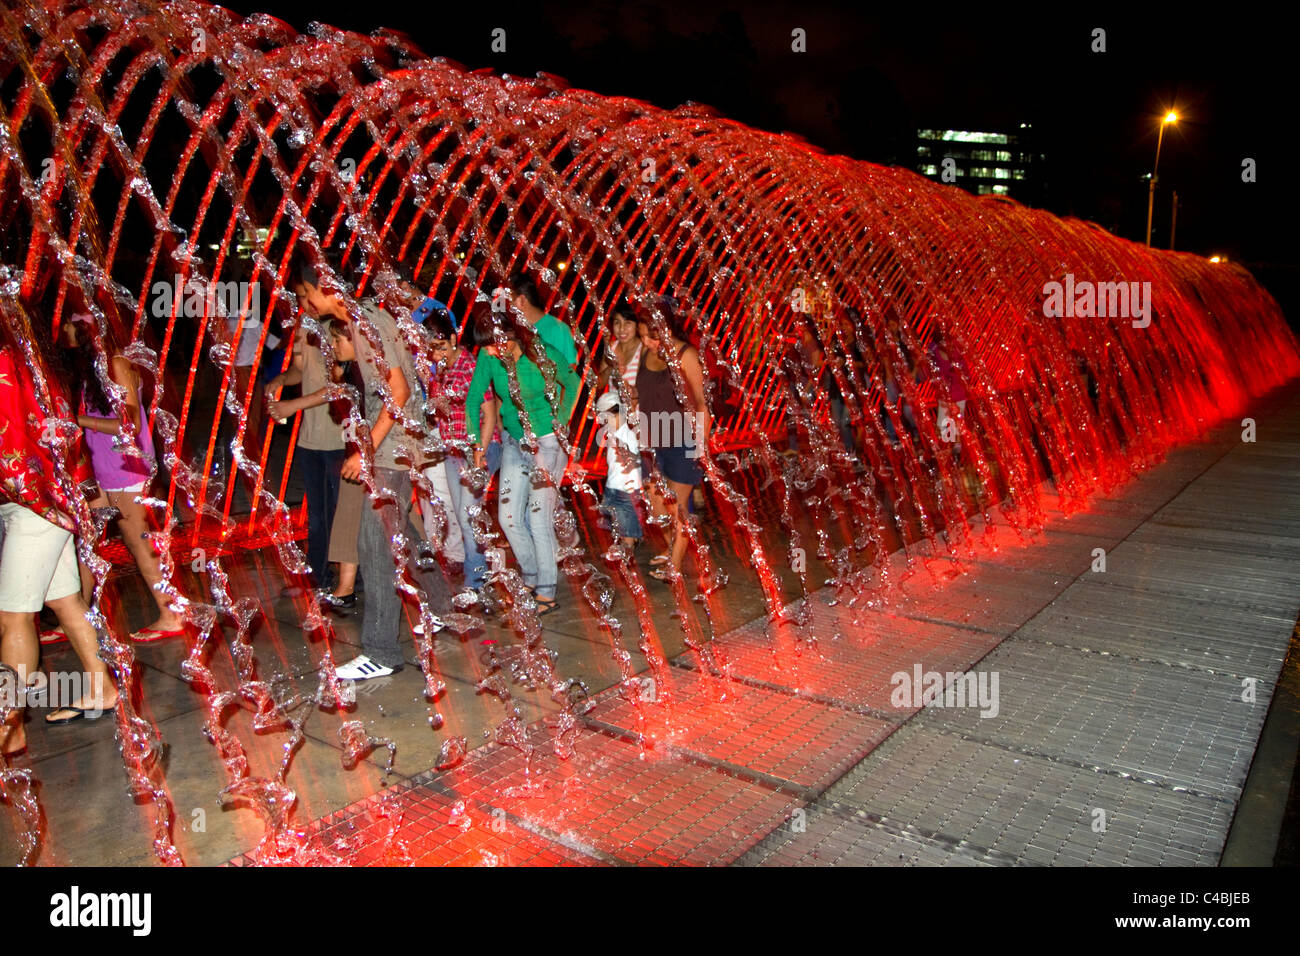 Water fountains light up at night in the Magic Circuit of Water park in Lima, Peru. Stock Photo